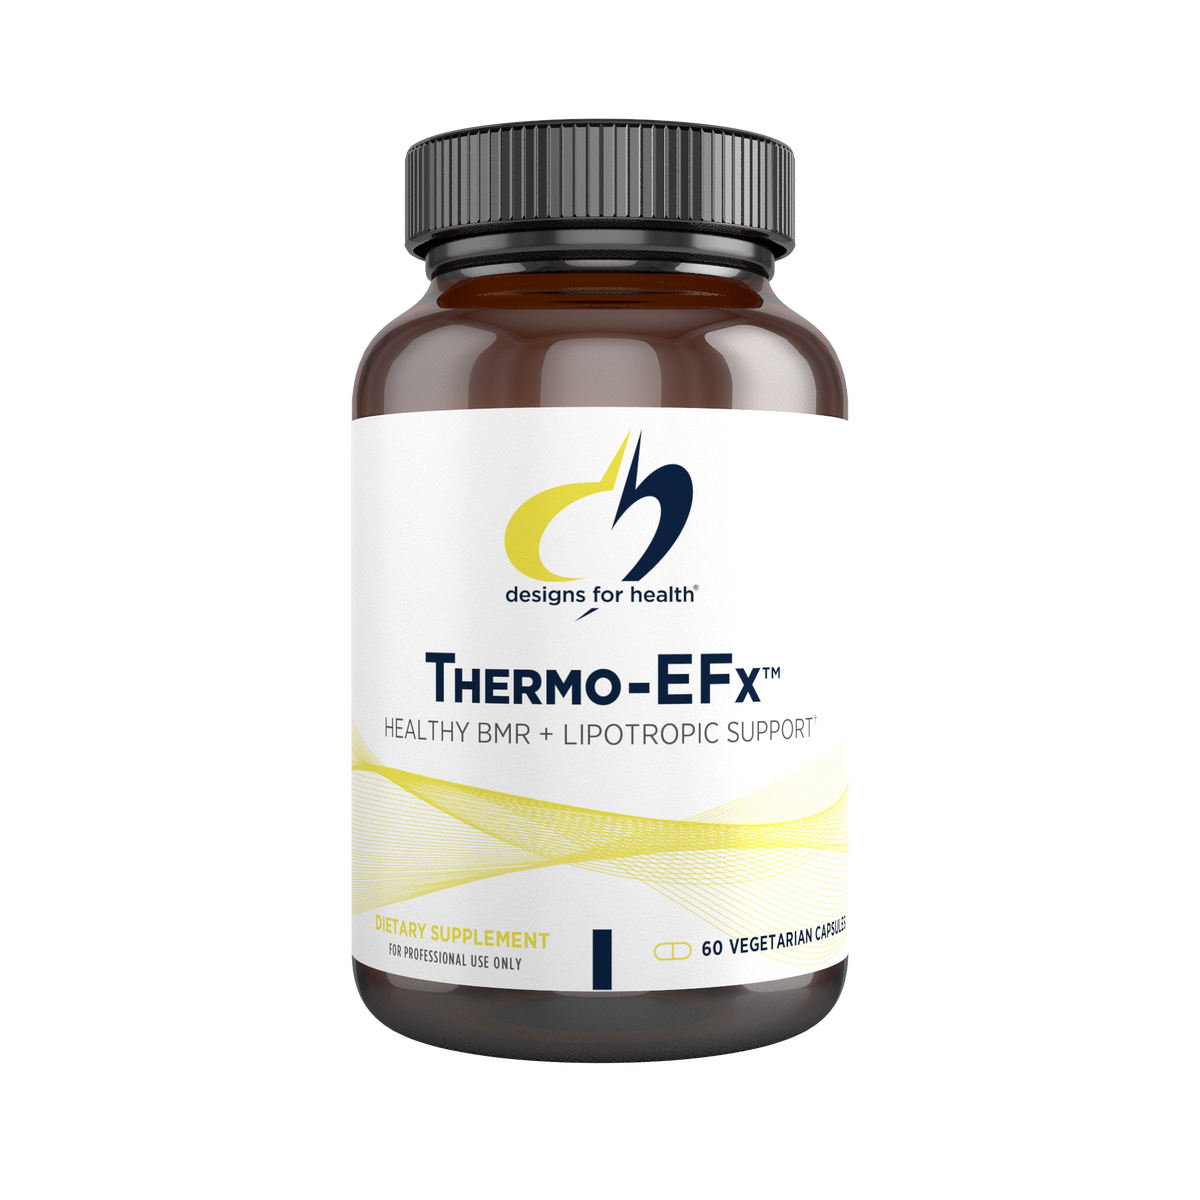 Thermo-EFx™